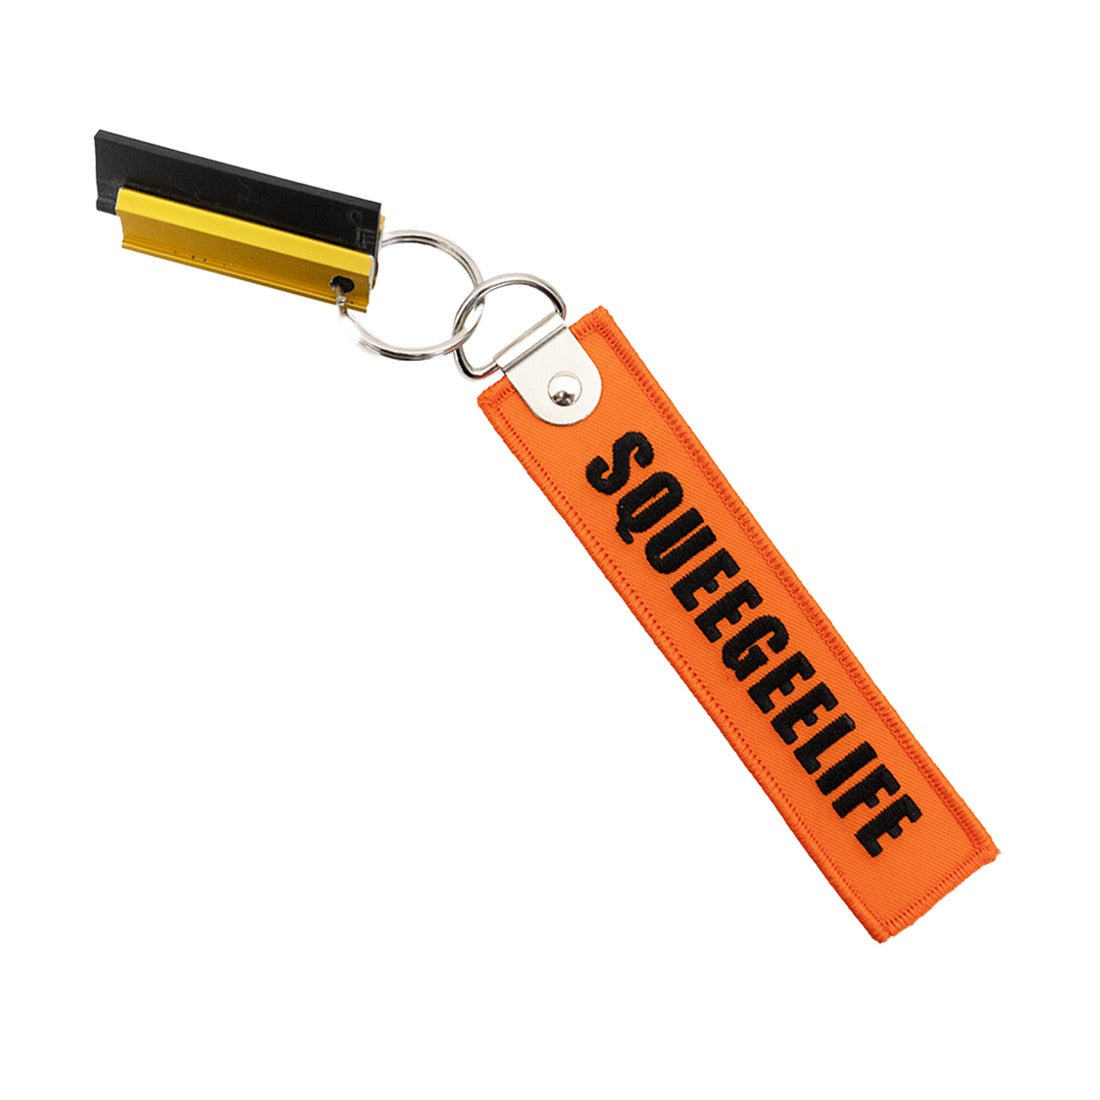 Squeegee Life the Keychains Ettore Super Style Squeegee and Keychain View